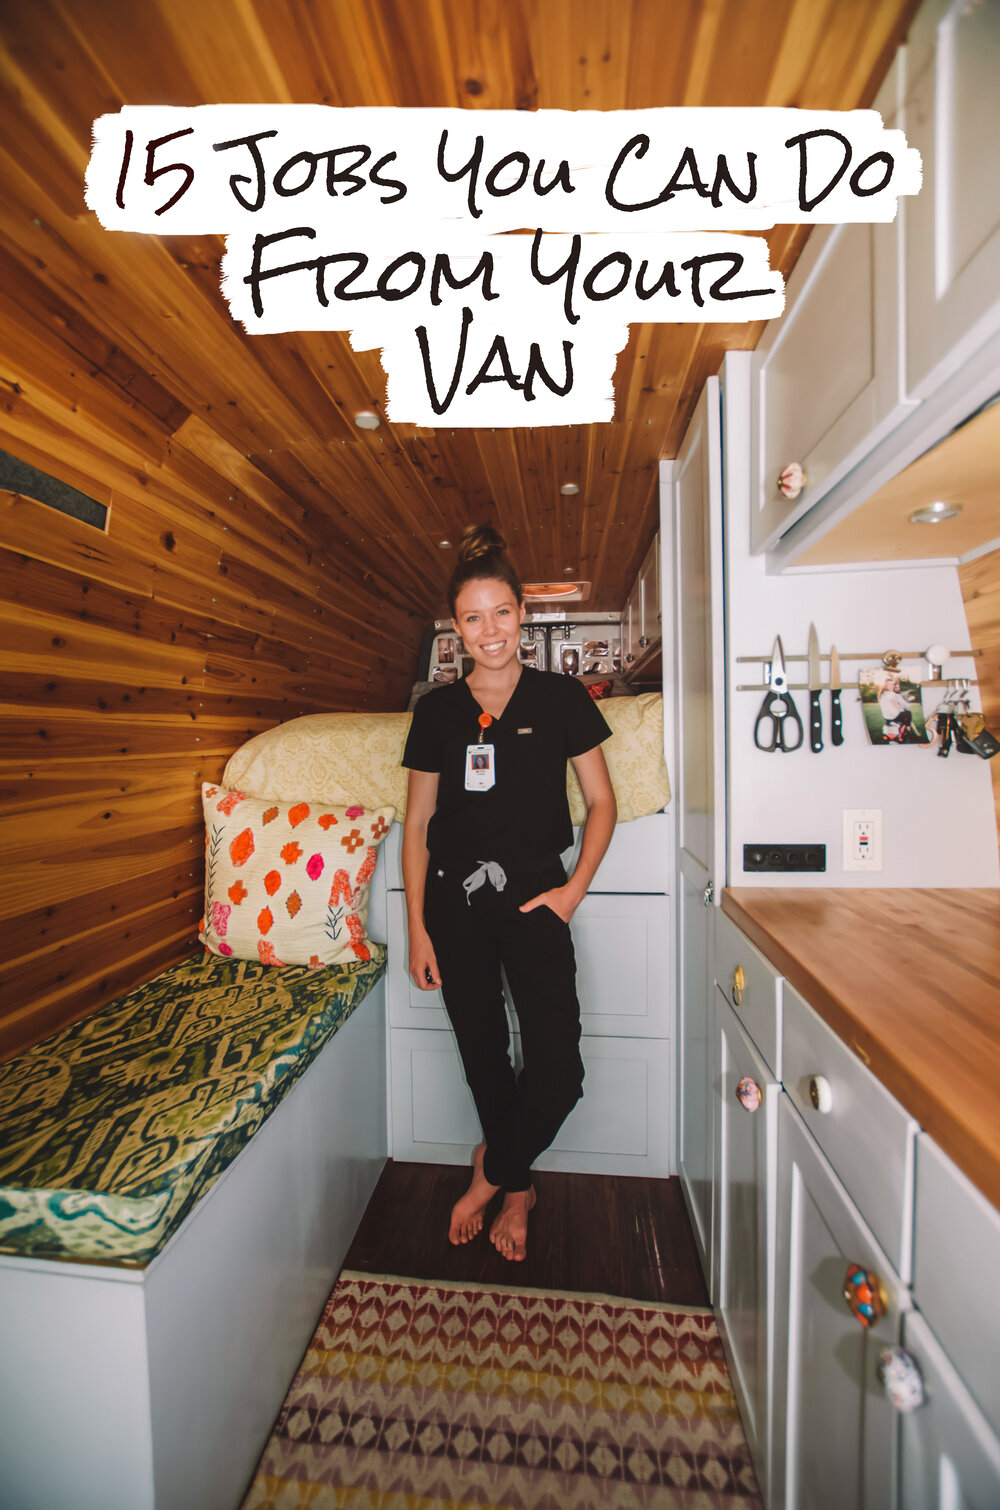 Fifteen Jobs You Can Do From Your Van — The Wandering